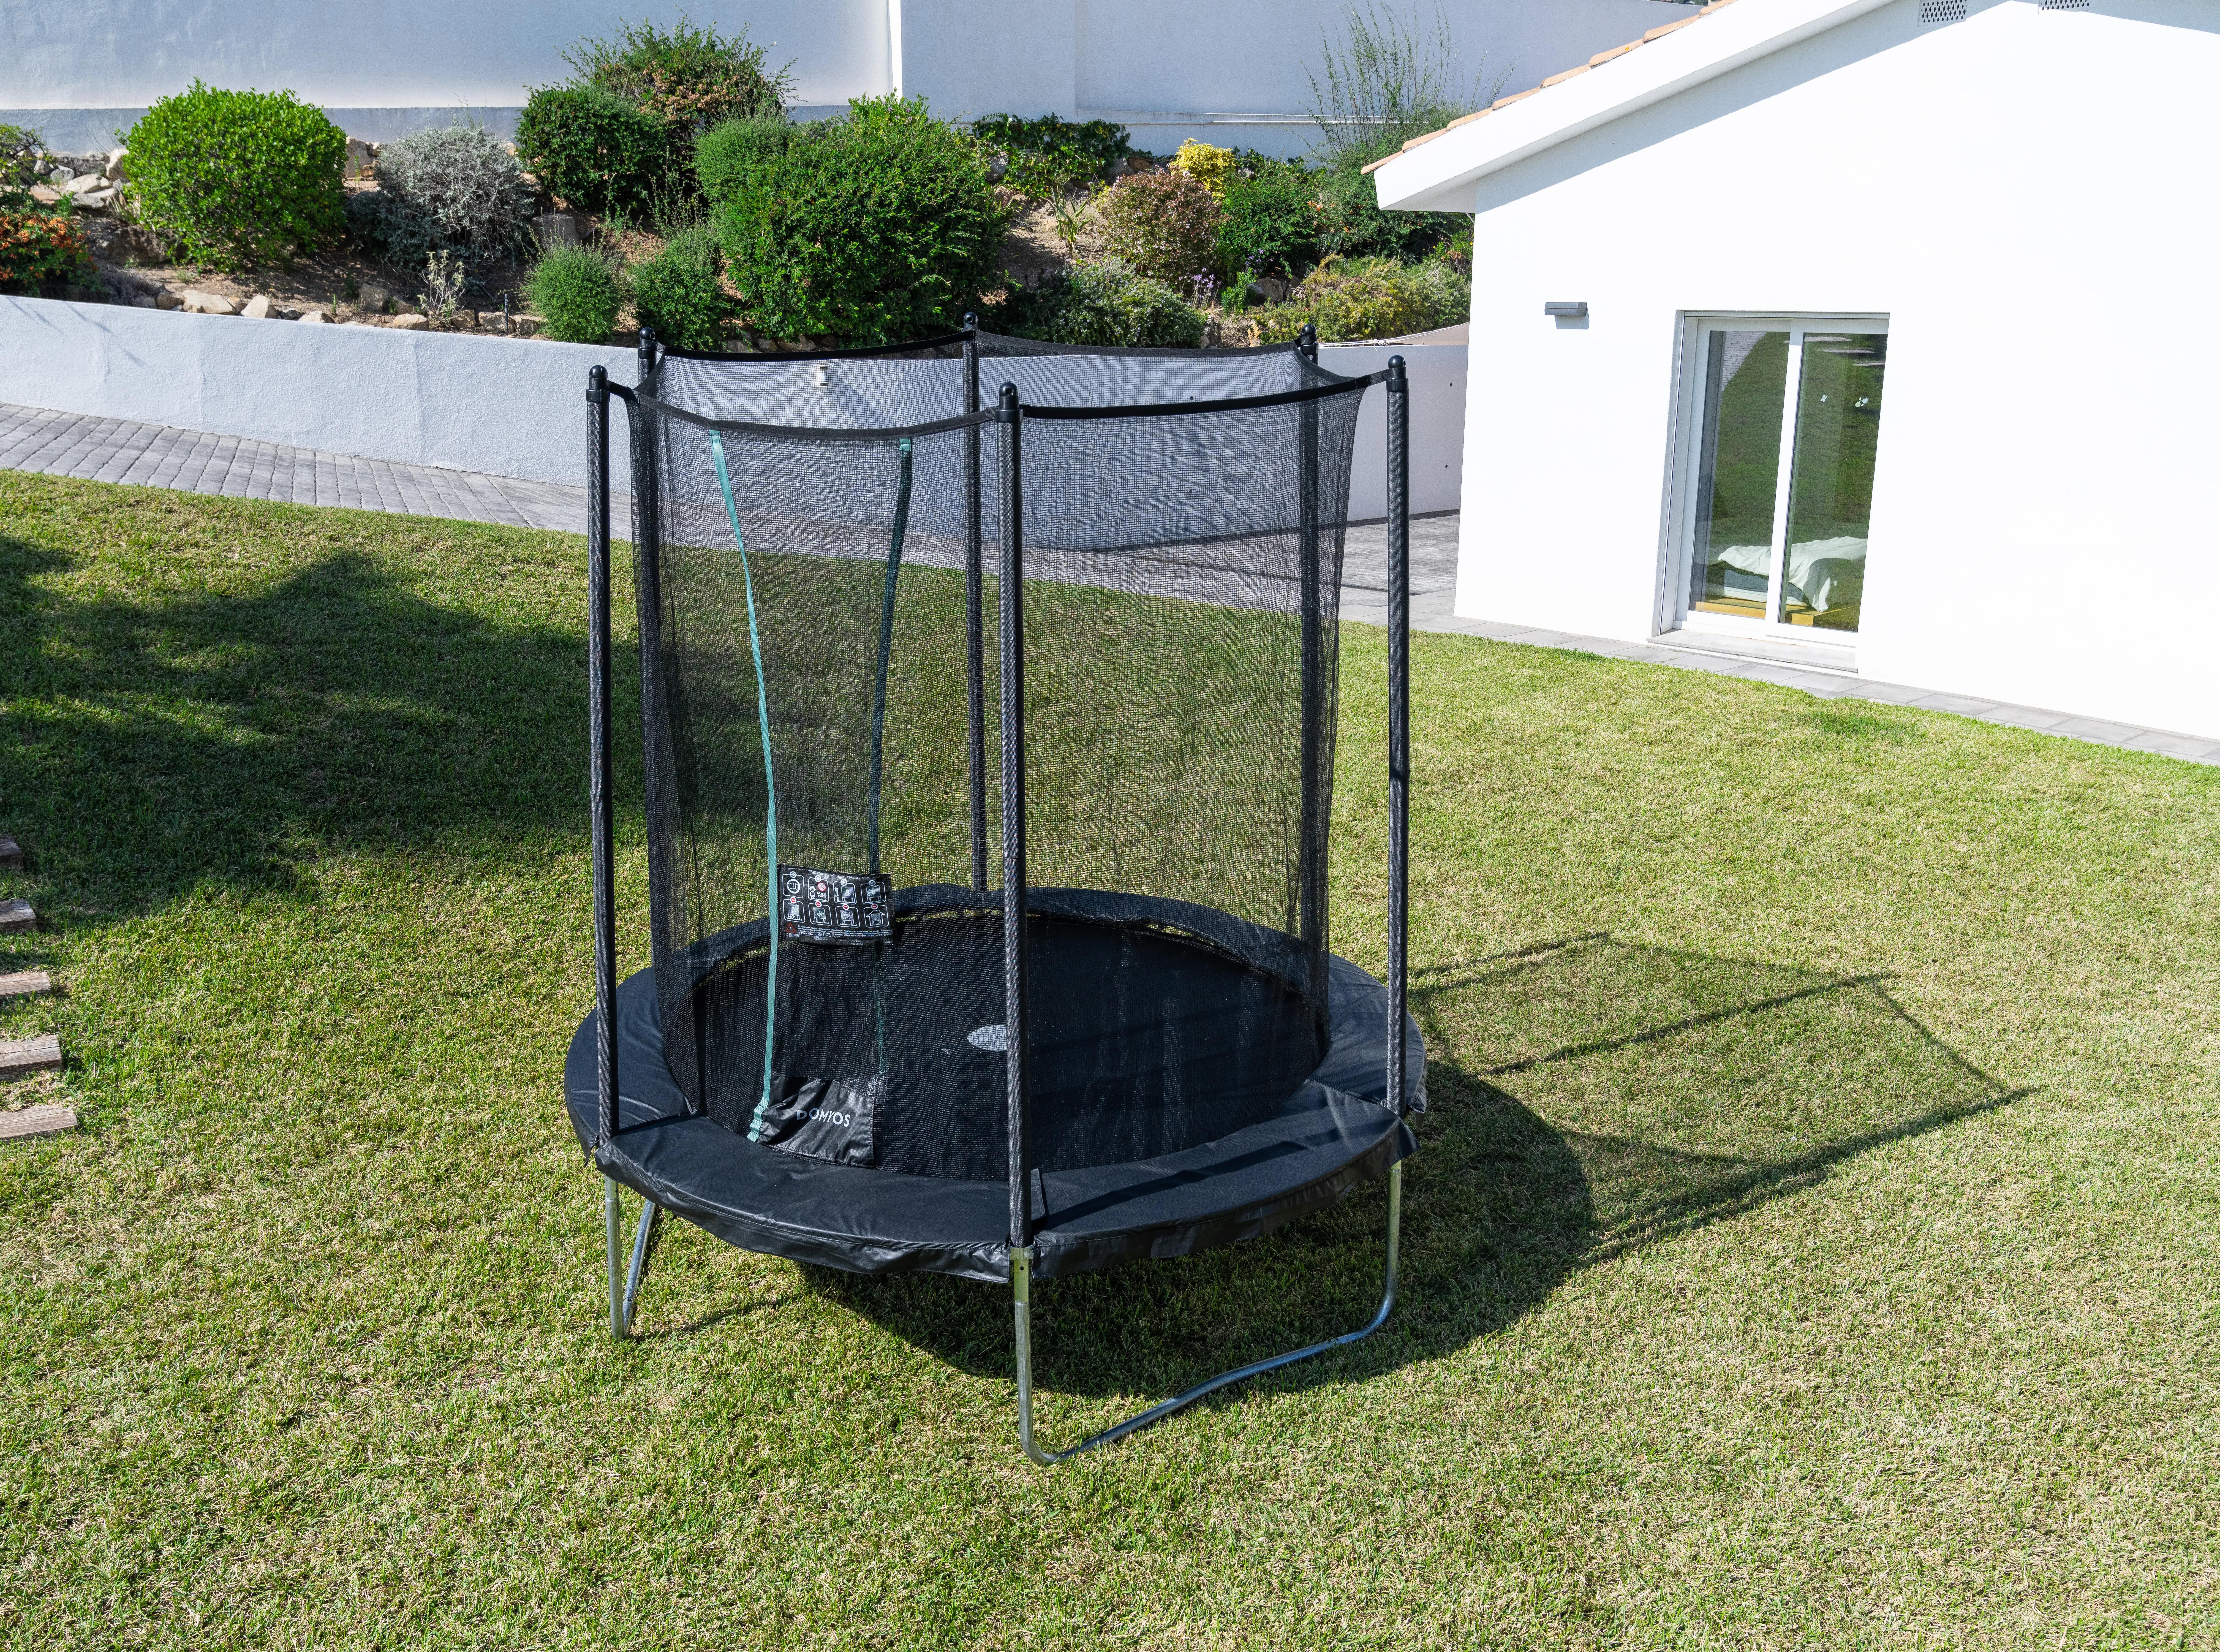 240 round trampoline: User guide and repairs